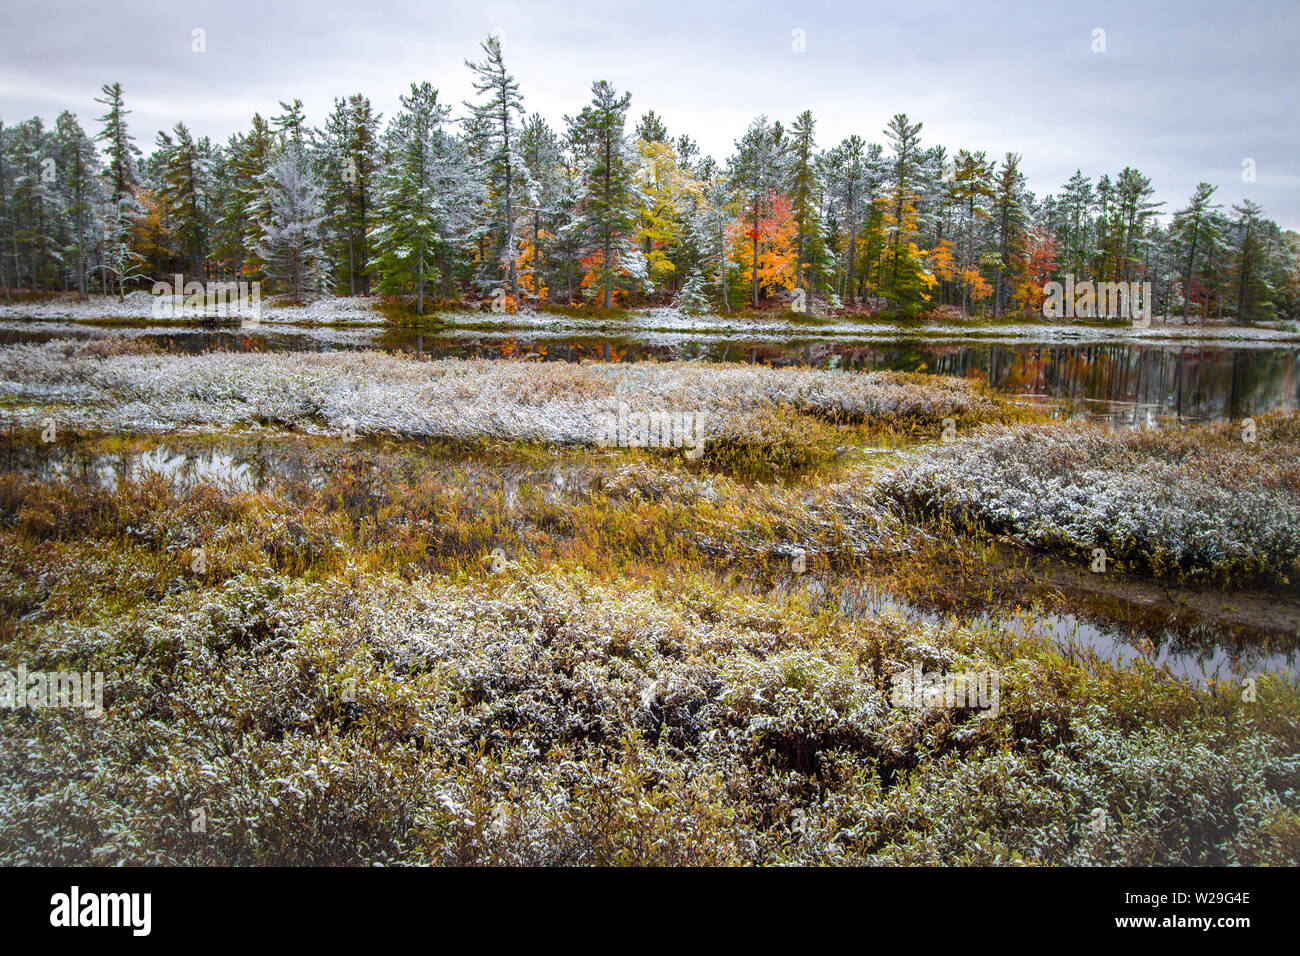 Michigan Forest First Snow Landscape. Autumn foliage covered in snow at the wetlands of Tahquamenon Falls State Park in Newberry, Michigan. Stock Photo